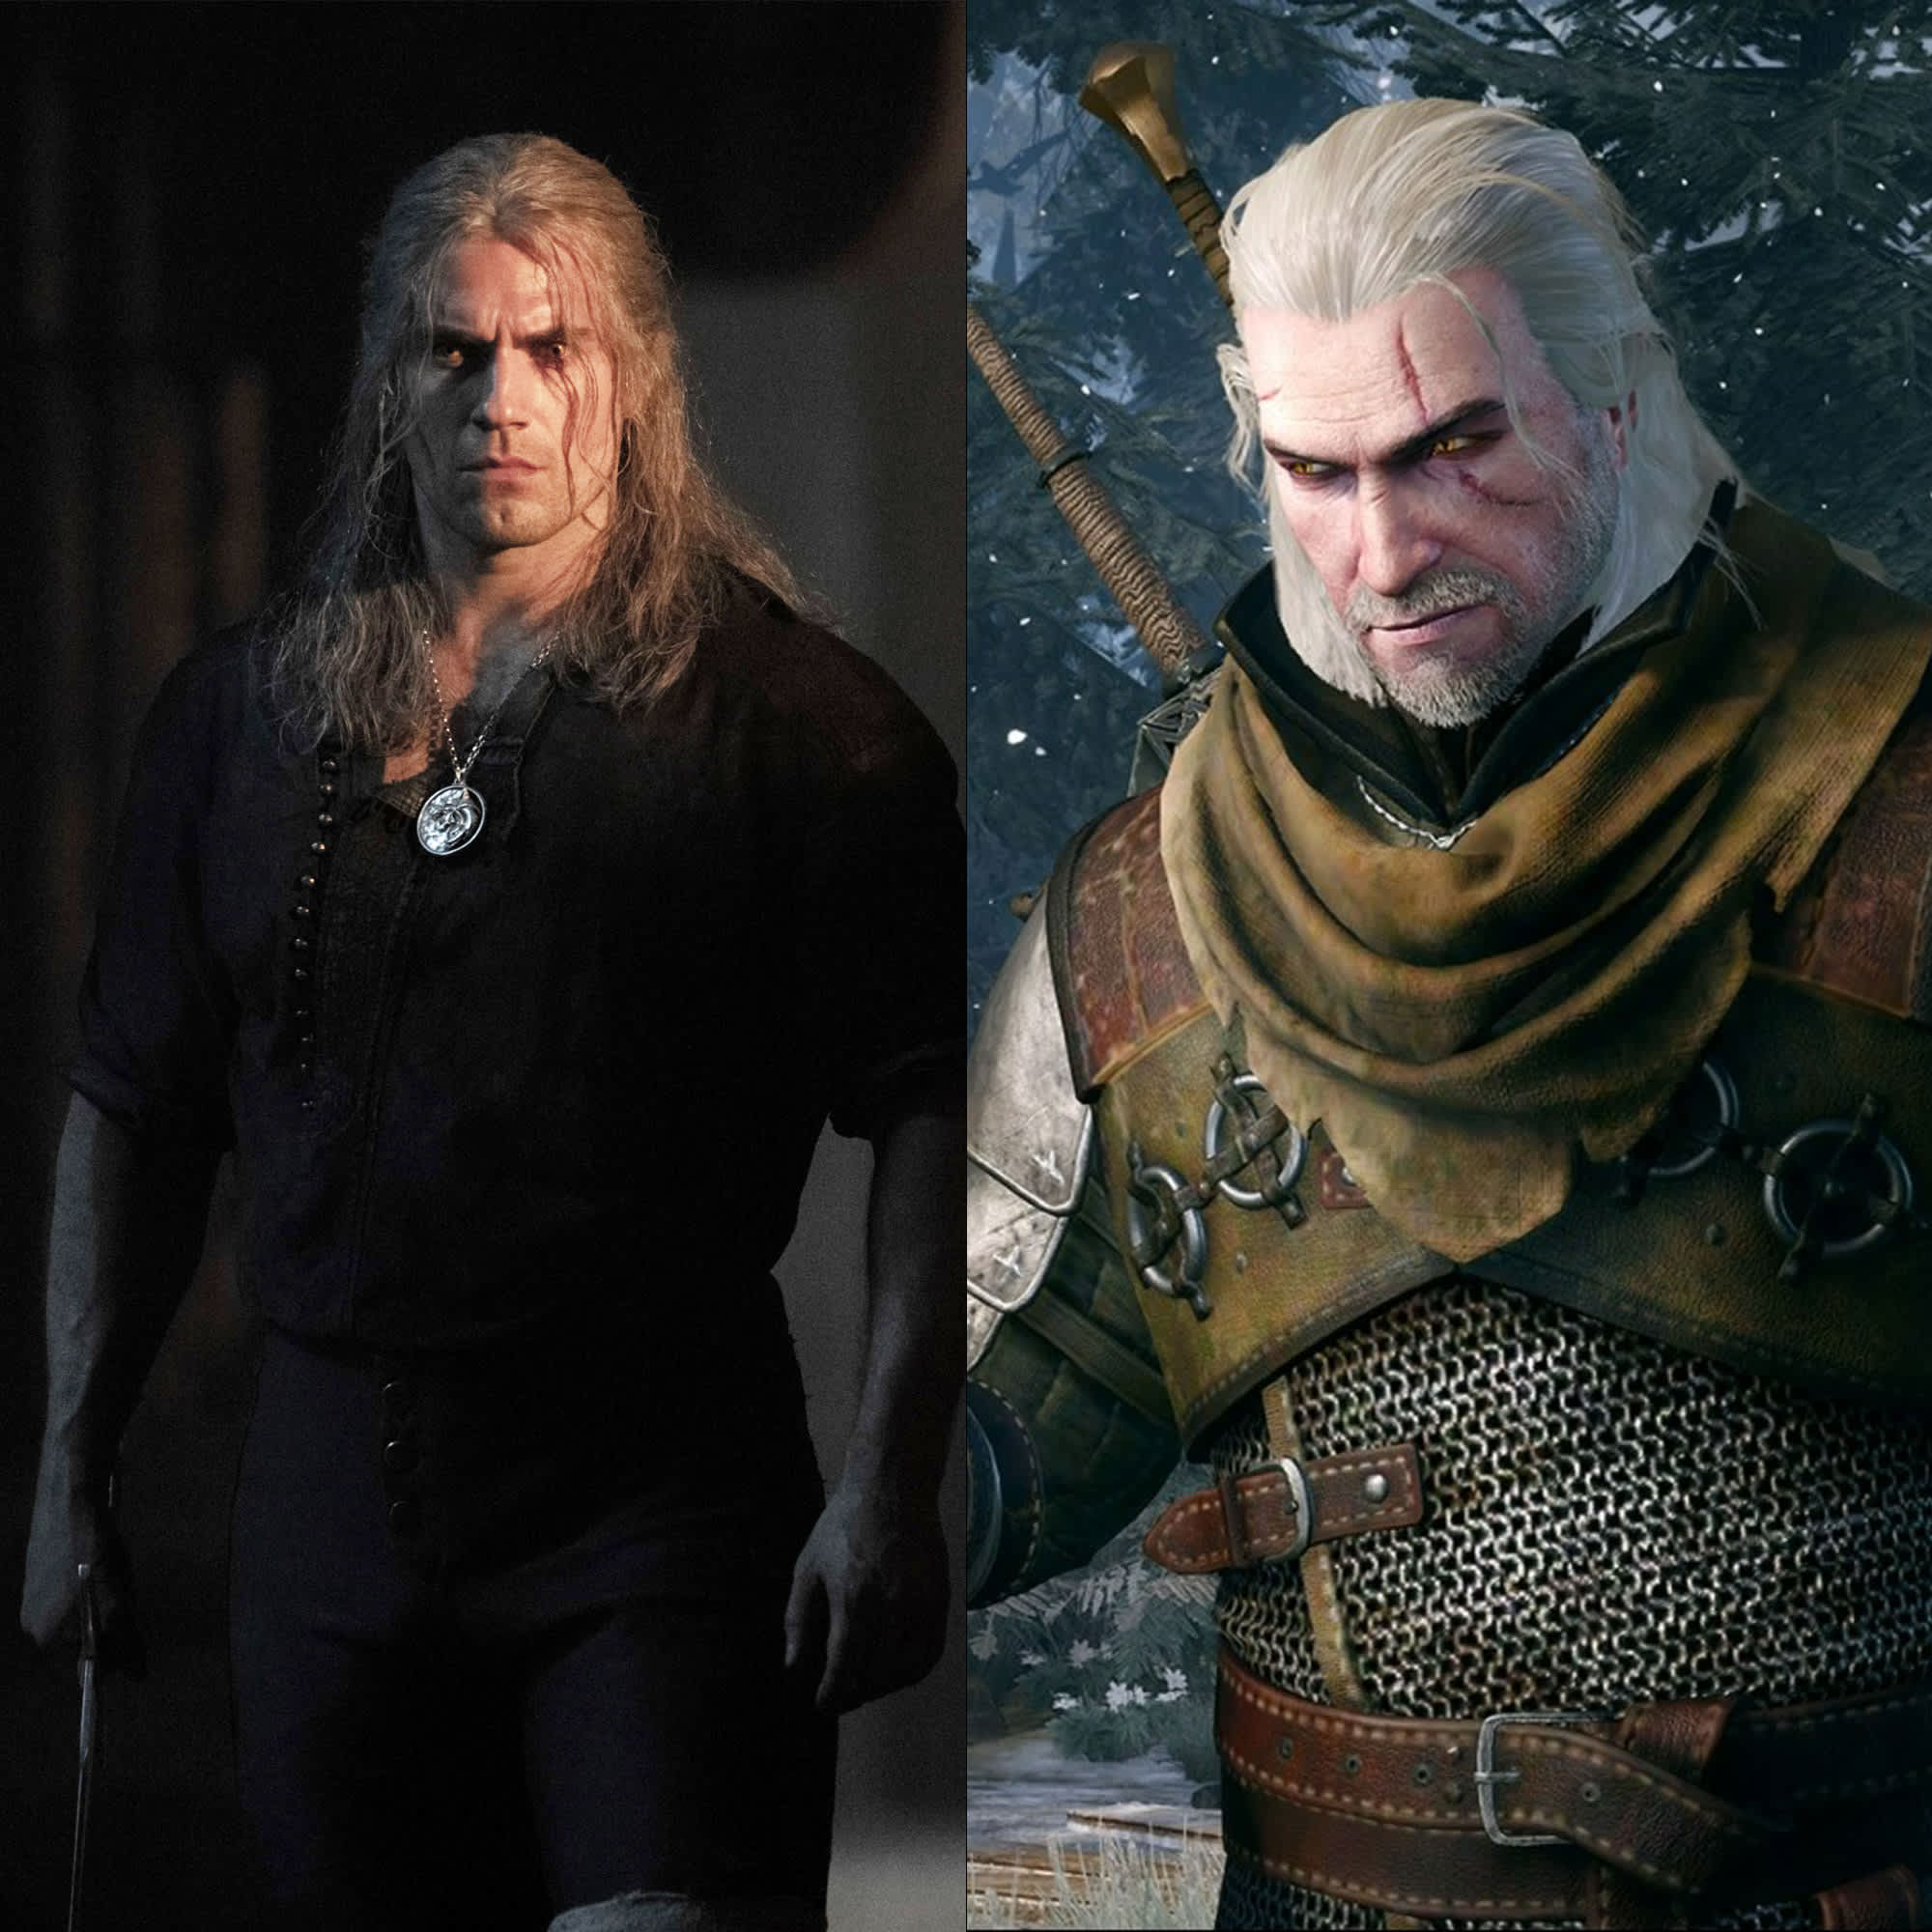 Which Witcher Game Should You Play After Bingeing The Netflix